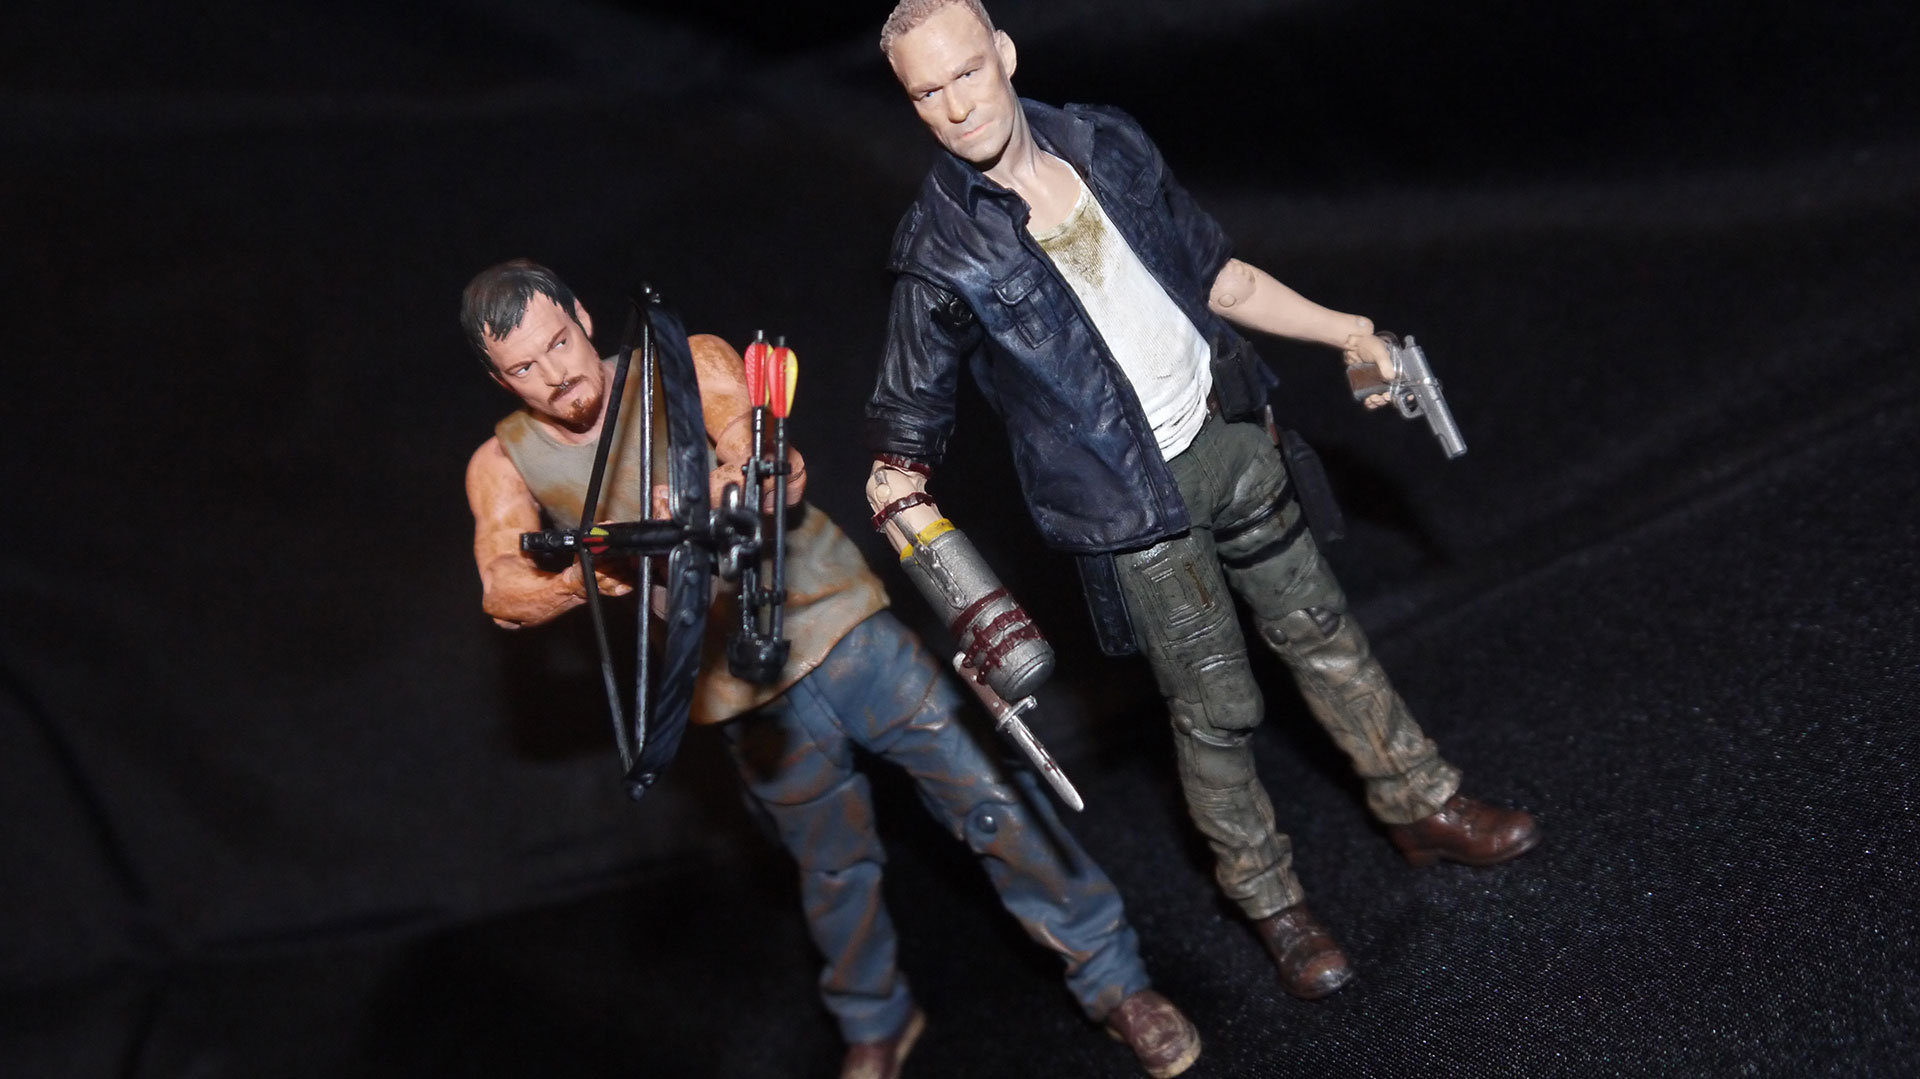 Hunting Down The Fourth Season Of The Walking Dead Action Figures